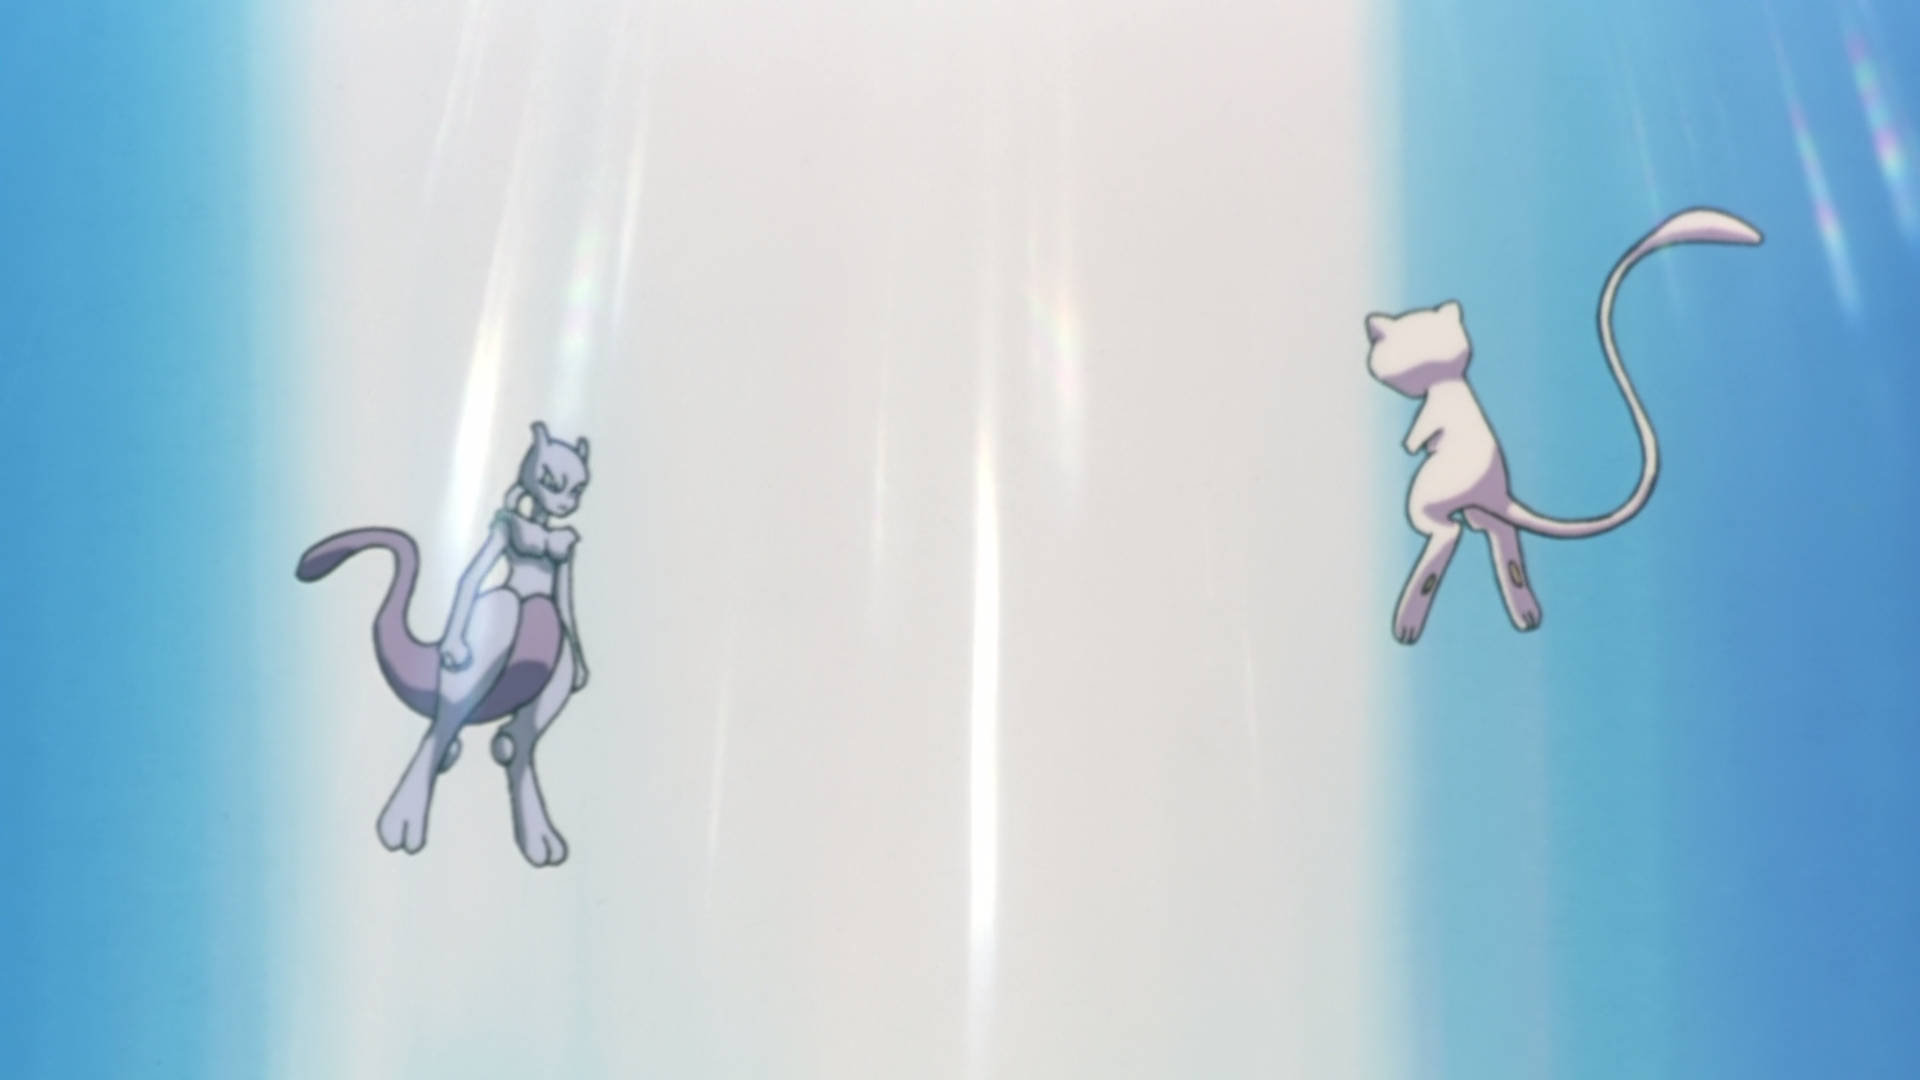 1920X1080 Mewtwo Wallpaper and Background